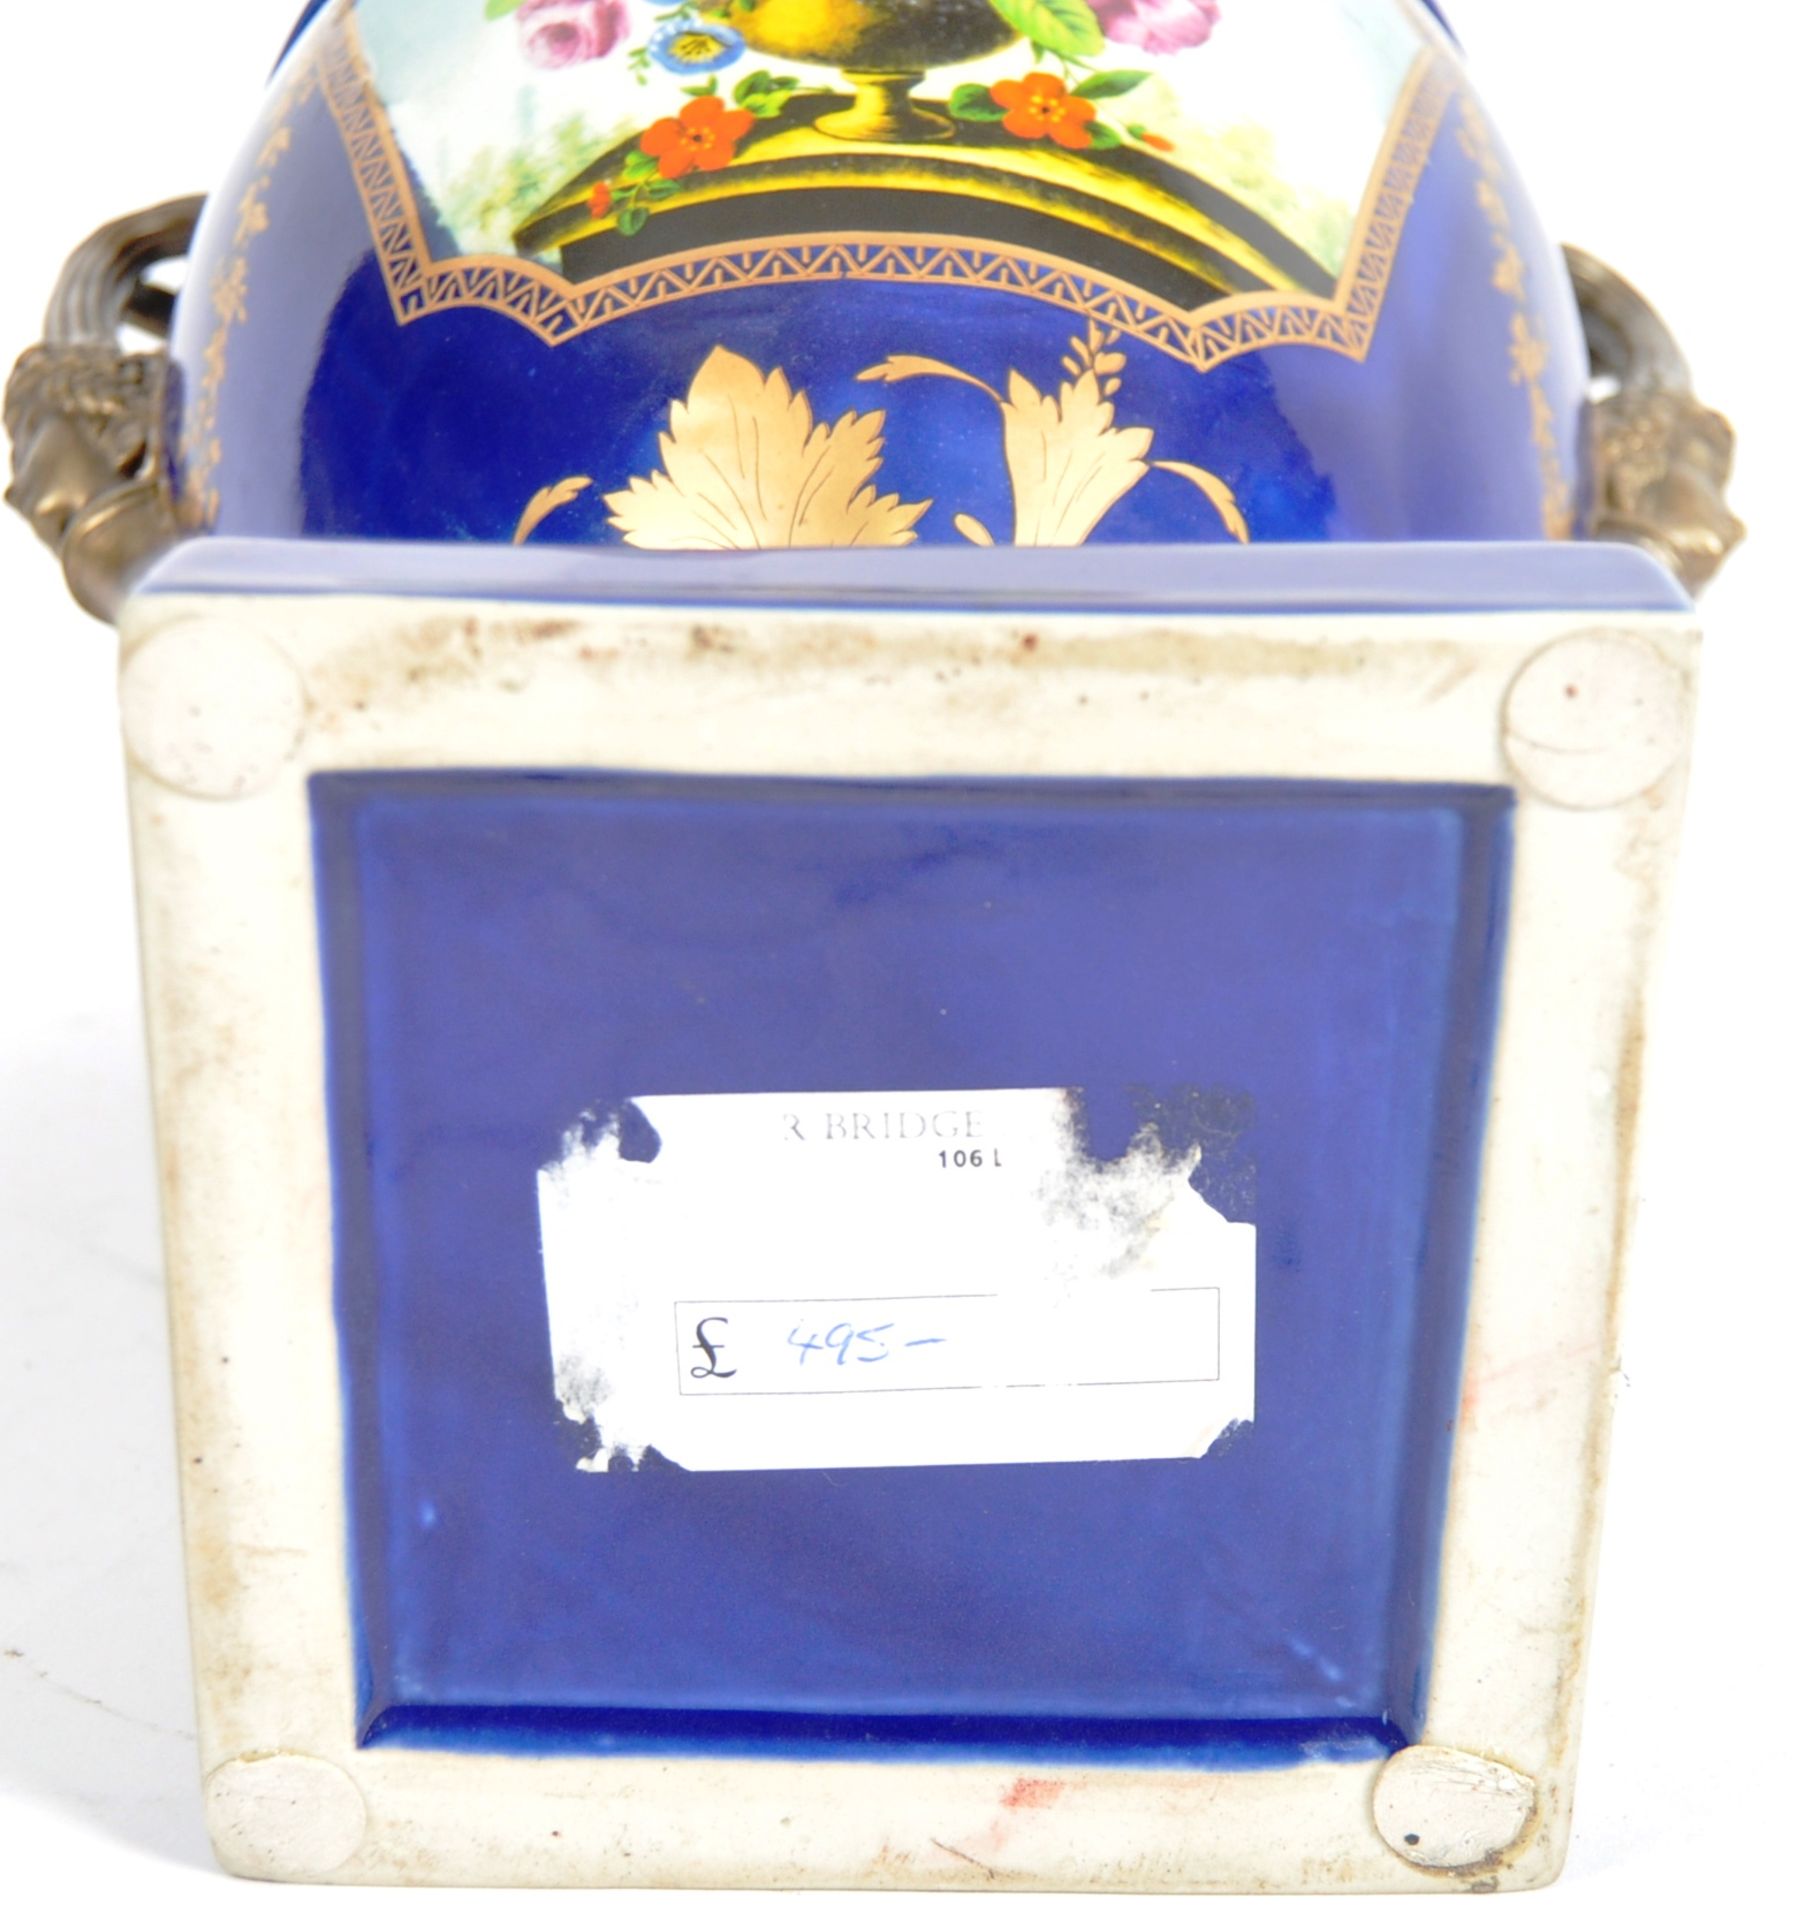 EARLY 20TH CENTURY PORCELAIN LIDDED URN - Image 11 of 11